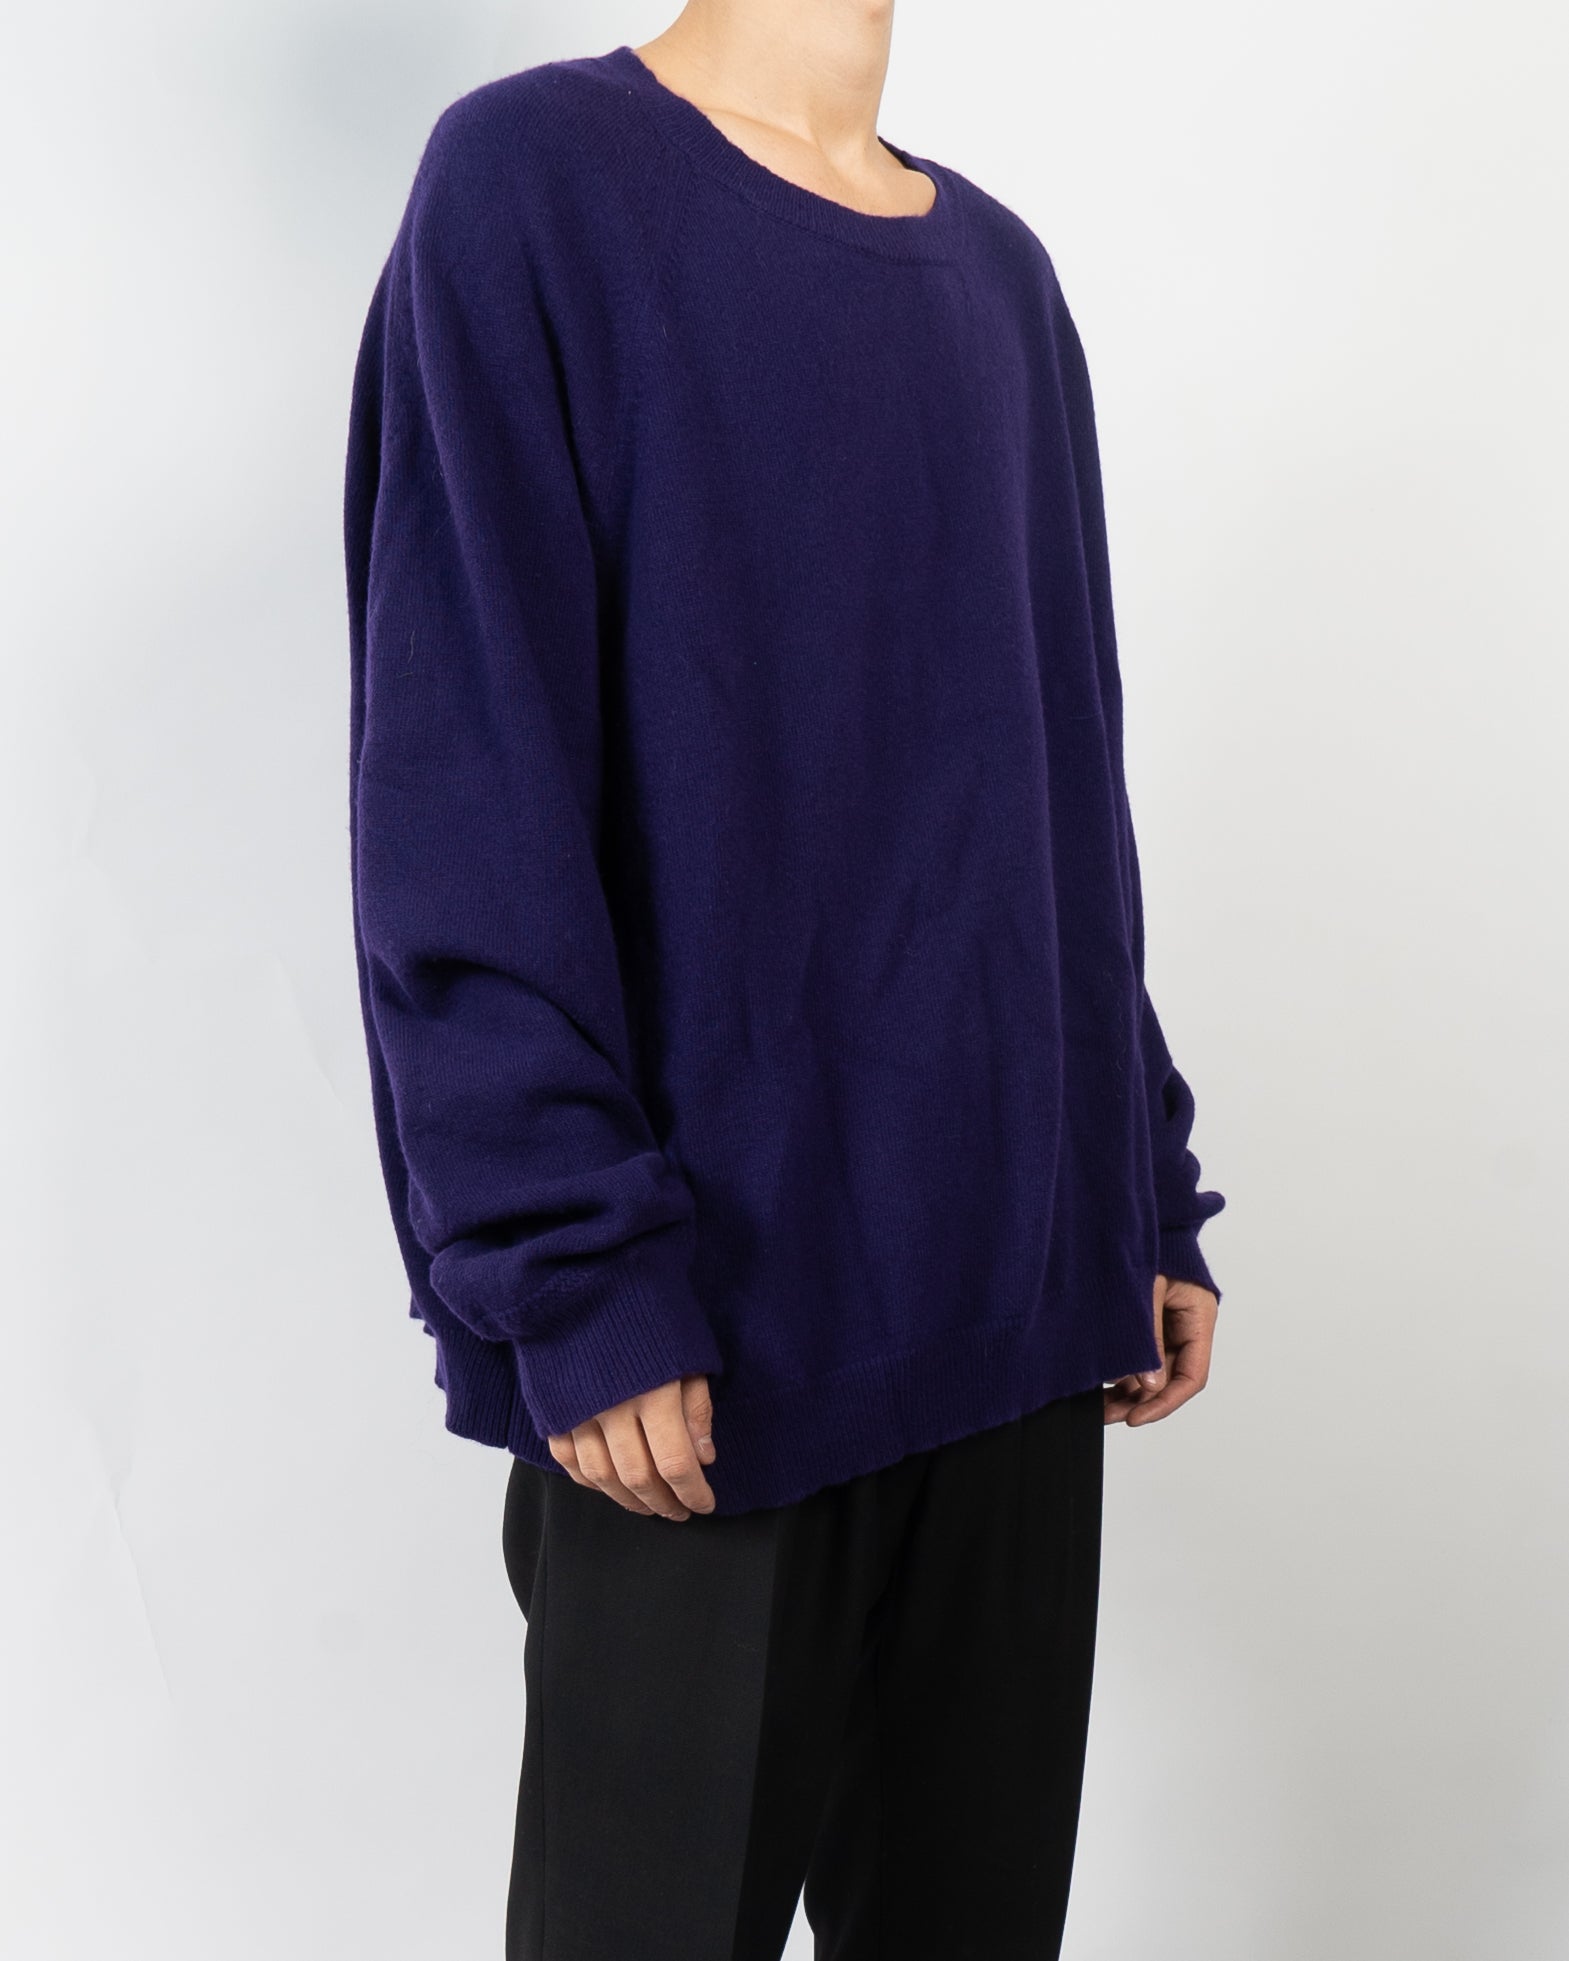 FW17 Duval Purple Oversized Knit 1 of 1 Sample